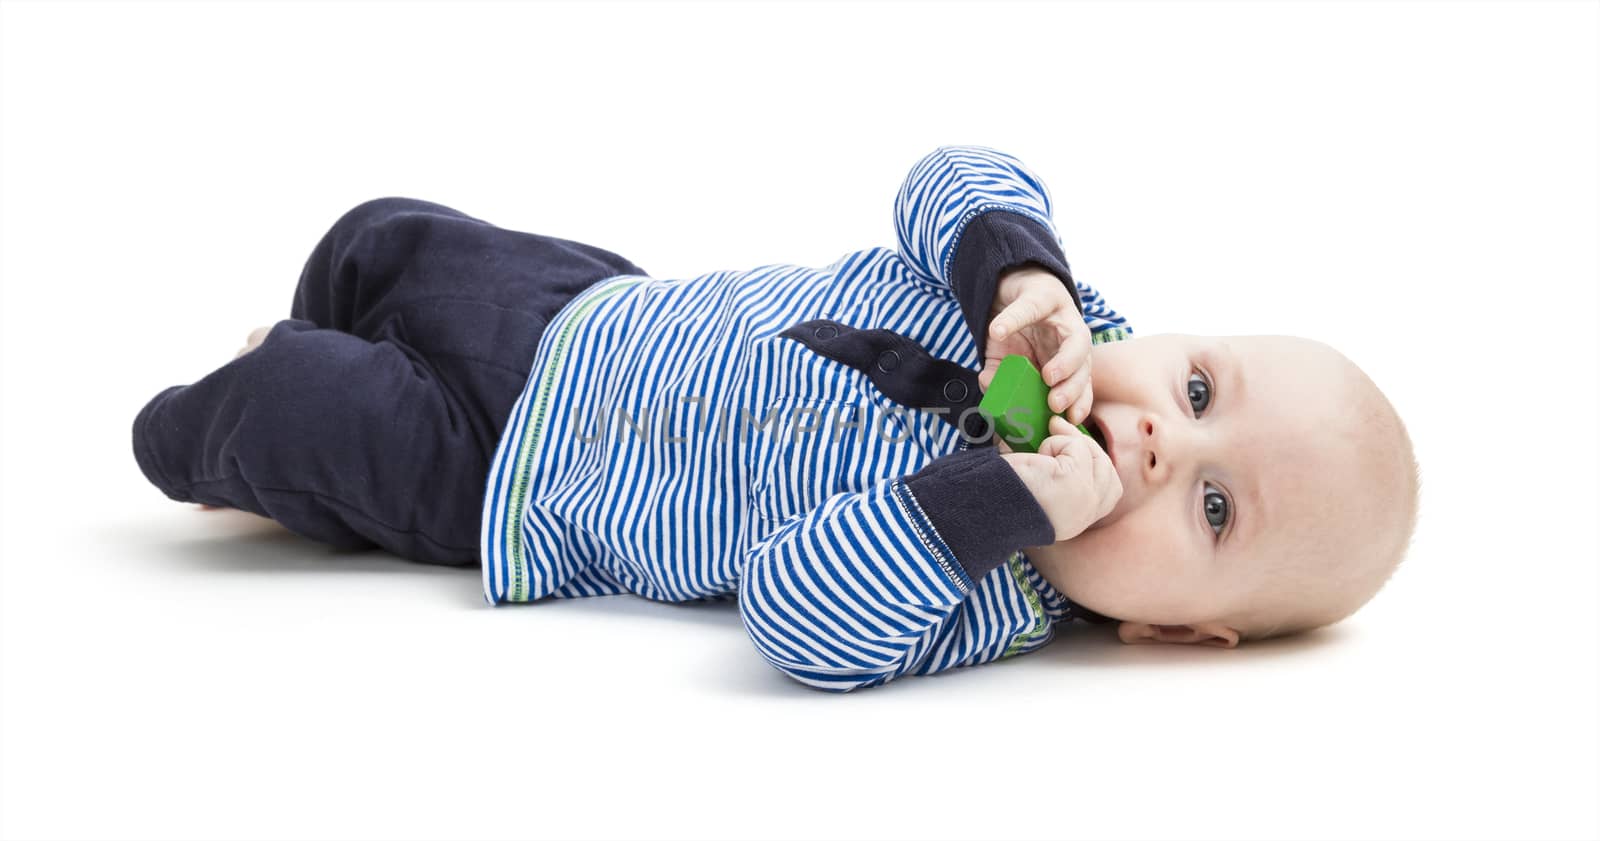 vertical image of toddler lying on floor. isolated on white background